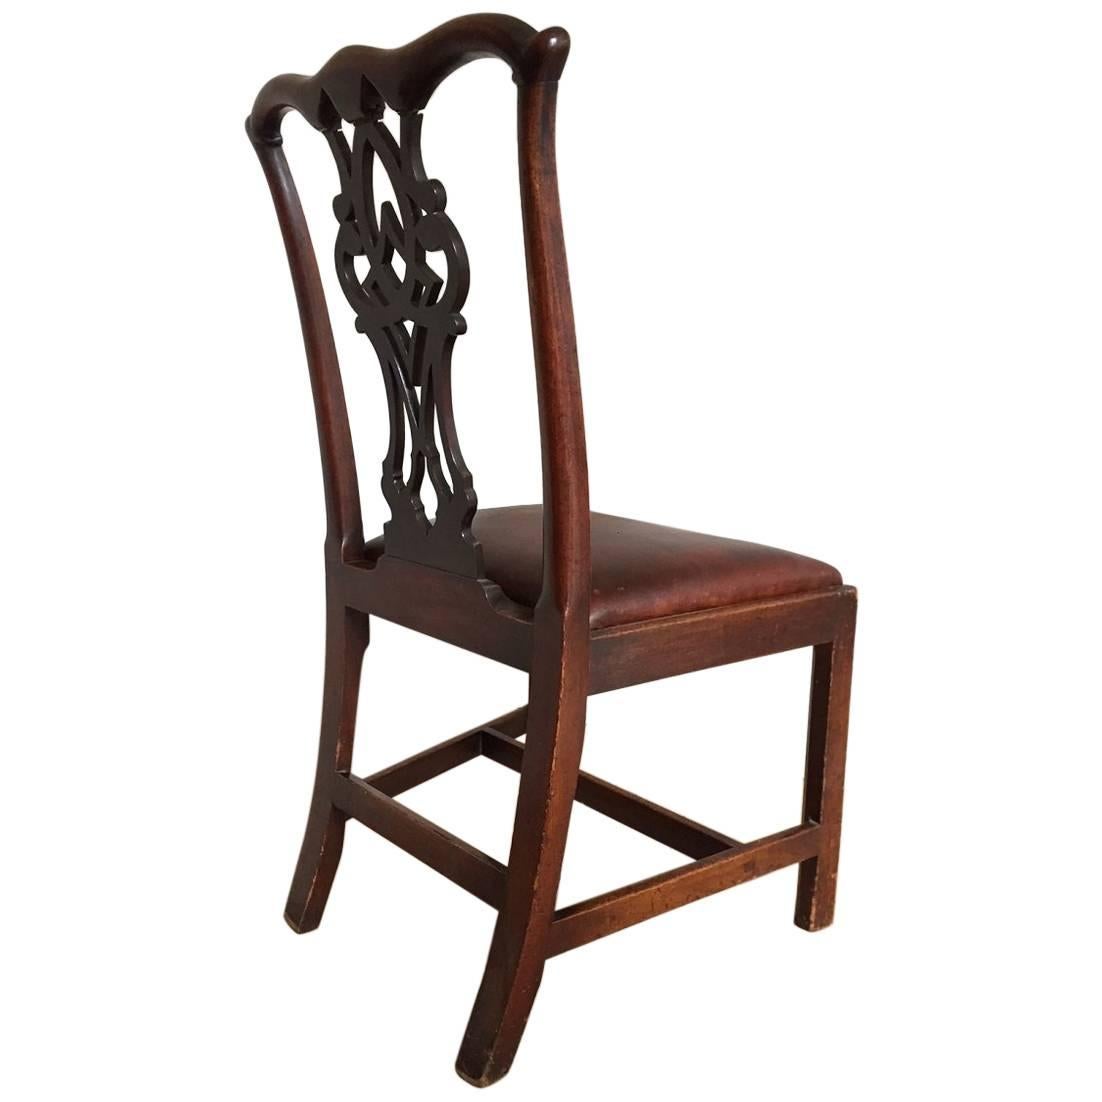 Chippendale Mahogany Chair with Leather Seat